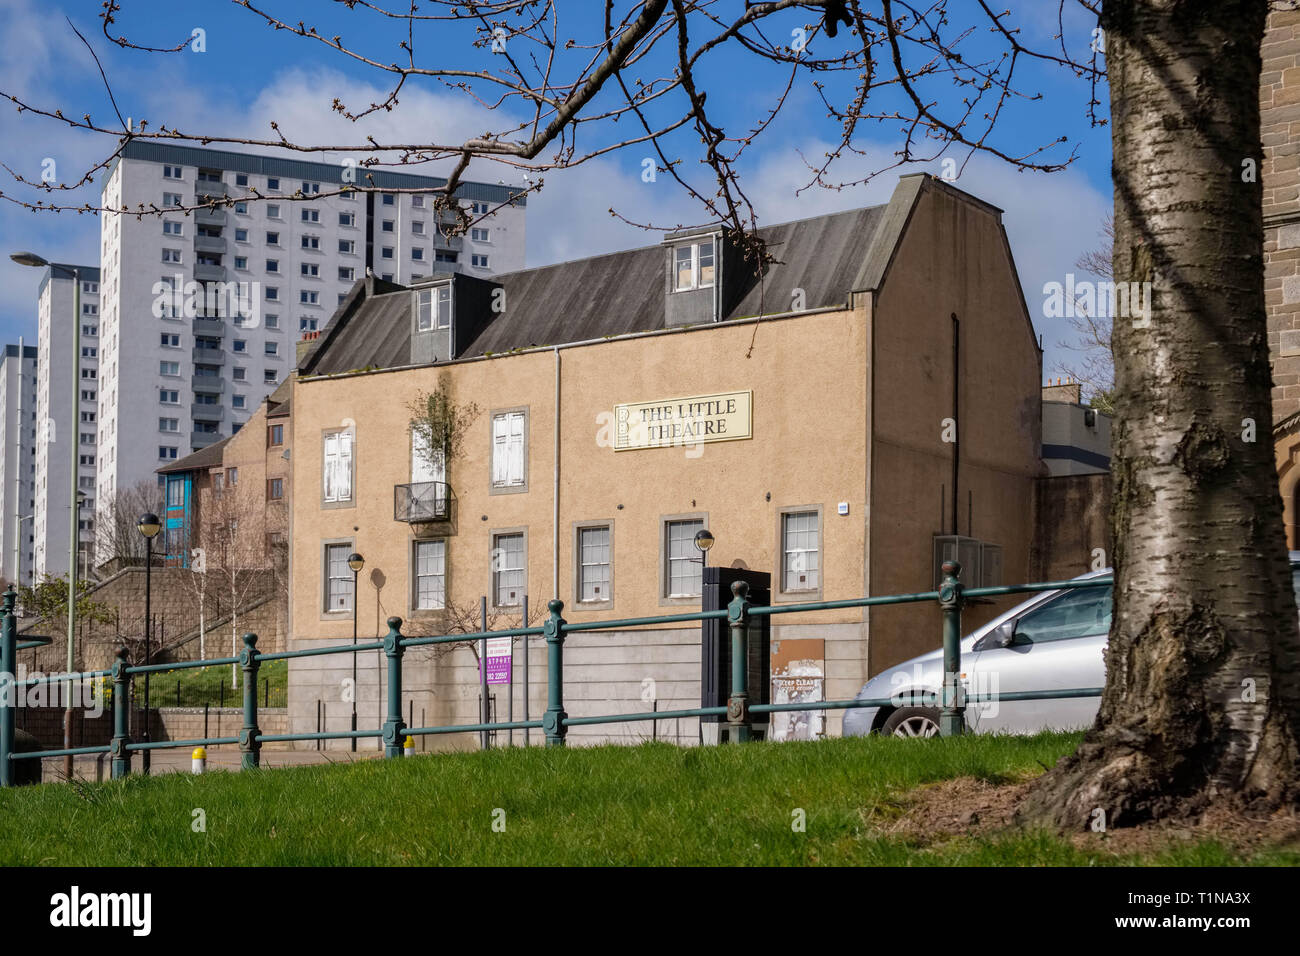 Dundee, Scotland, UK - March 23, 2019: The little theatre situated in Victoria Road Dundee Scotland with the modern multi-story properties overlooking Stock Photo